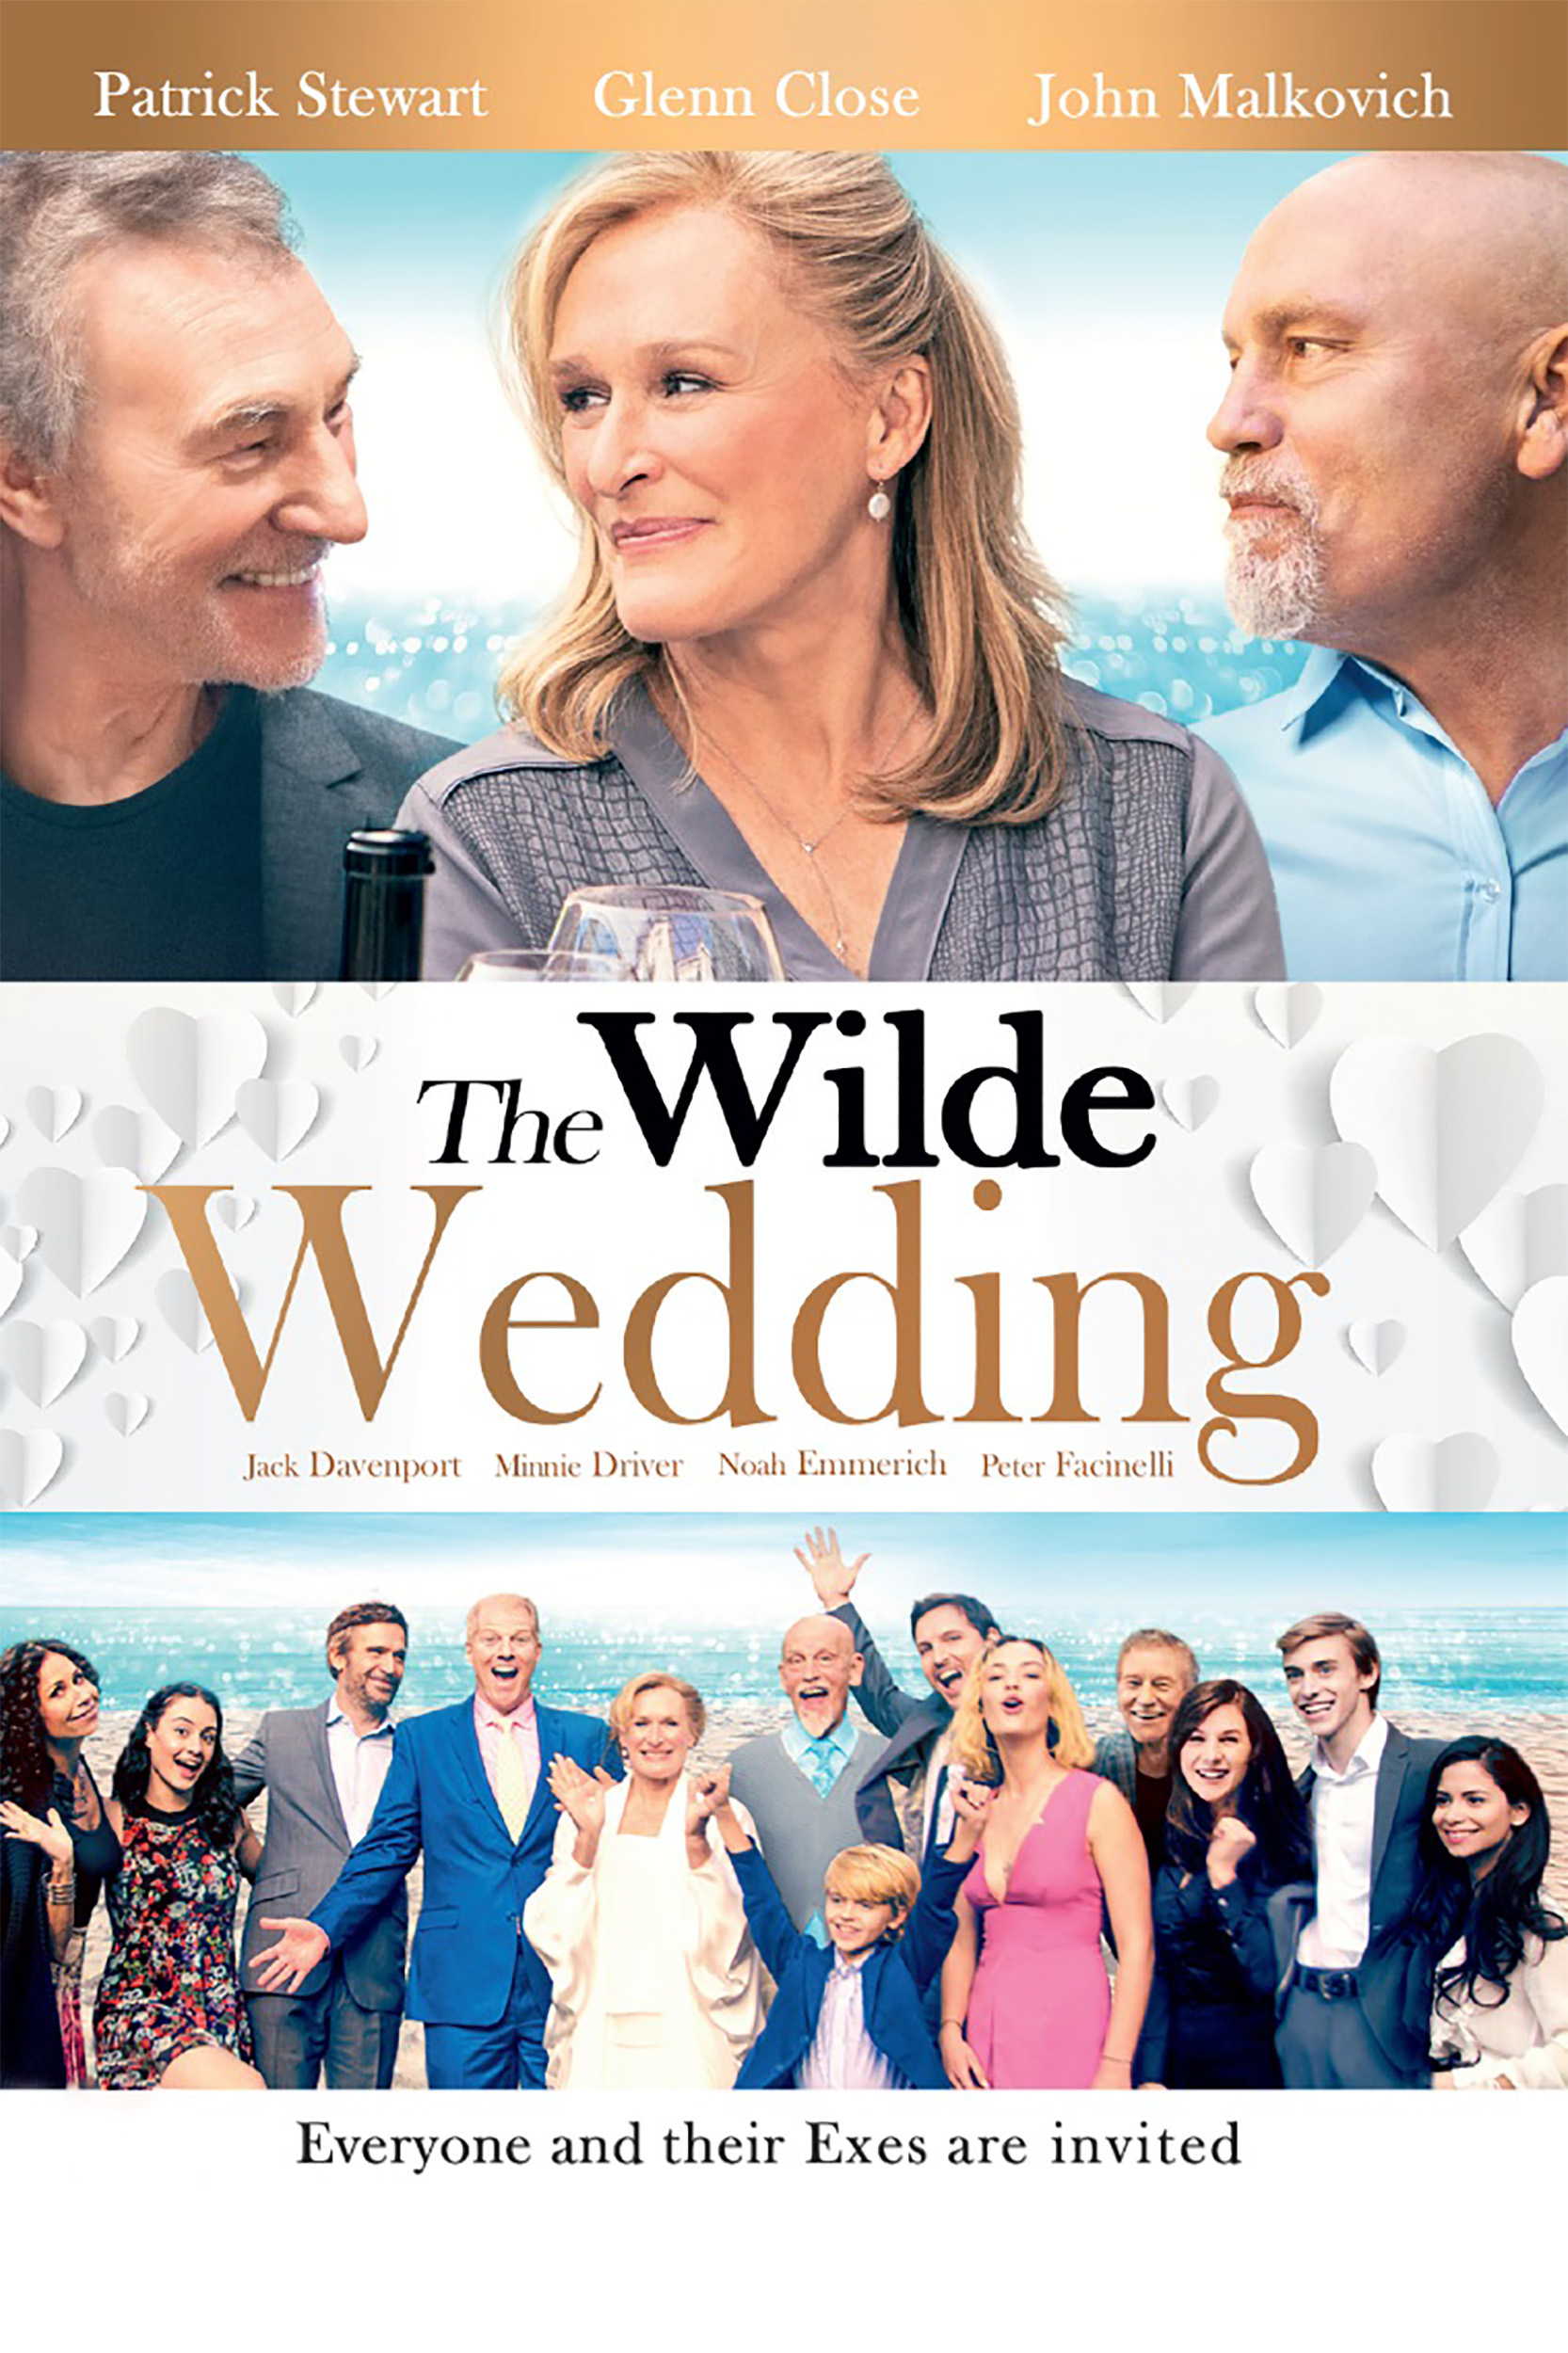 The Wilde Wedding - Where to Watch and Stream - TV Guide